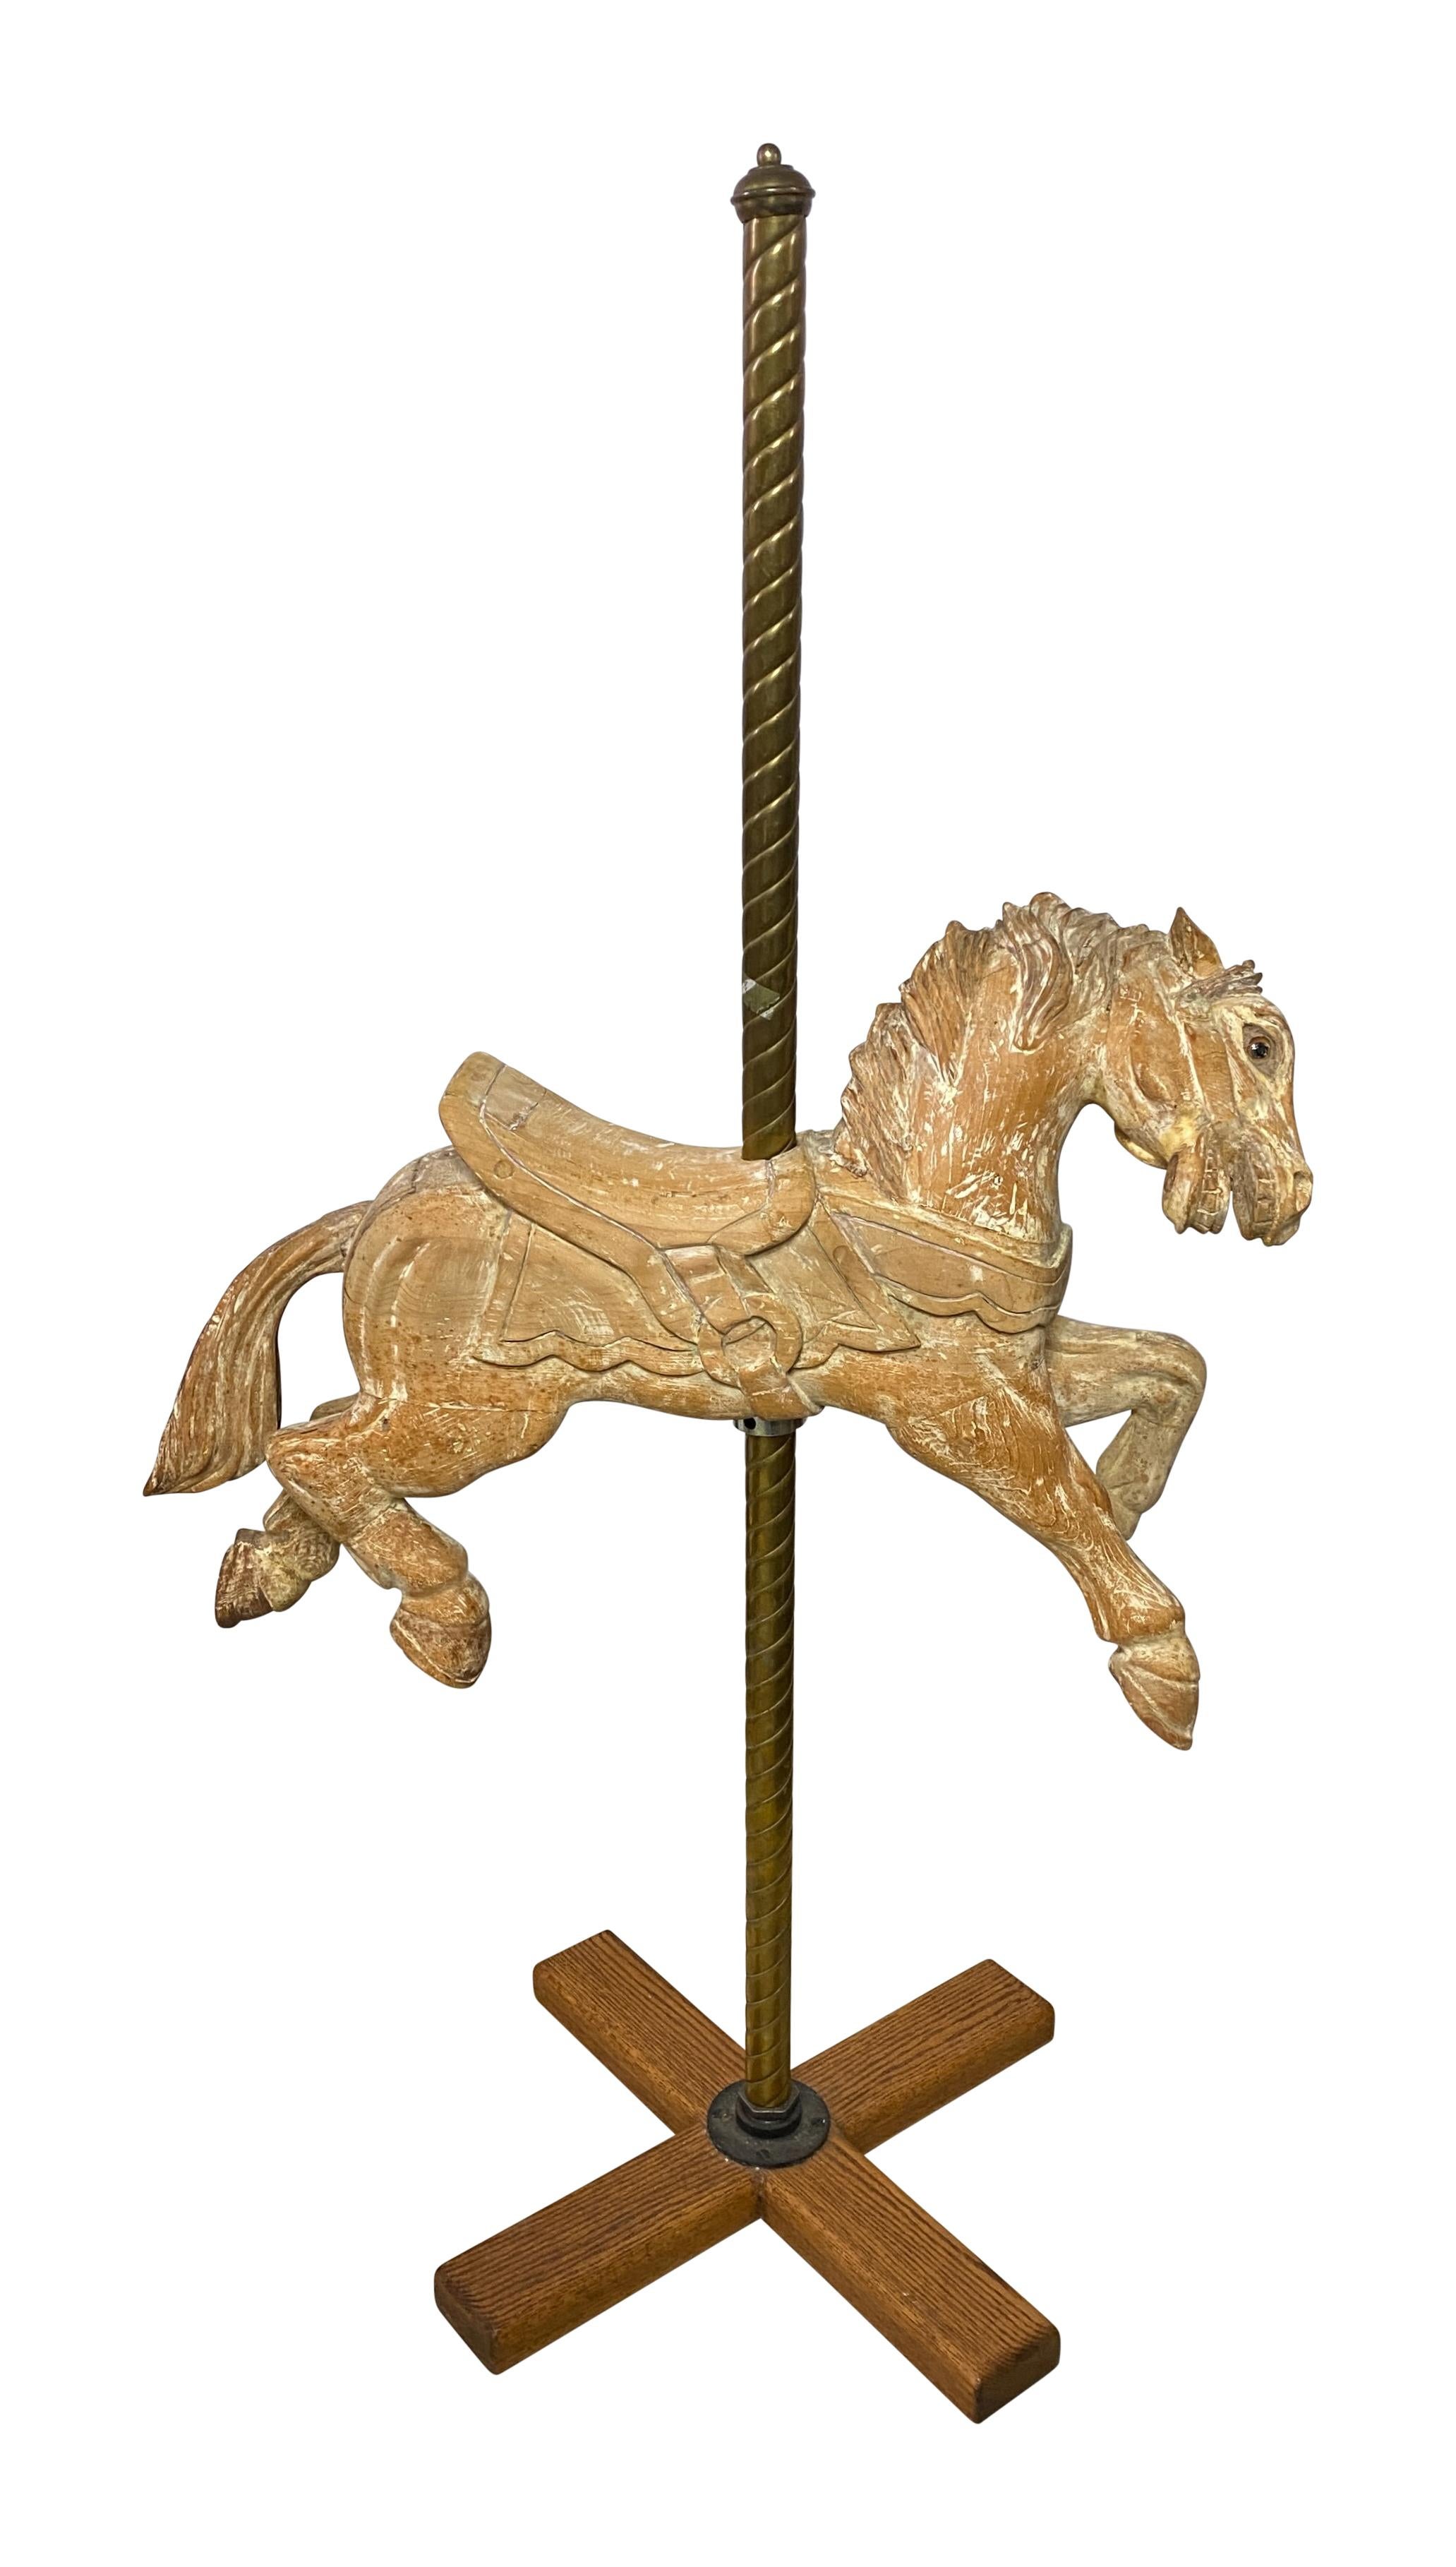 Antique vintage wood carousel horse on later custom made brass stand. 
Expertly carved with wonderful life like detail.
Originally painted but stripped of most of the old paint at some period in time.
Made in the first half the 20th century.
Height